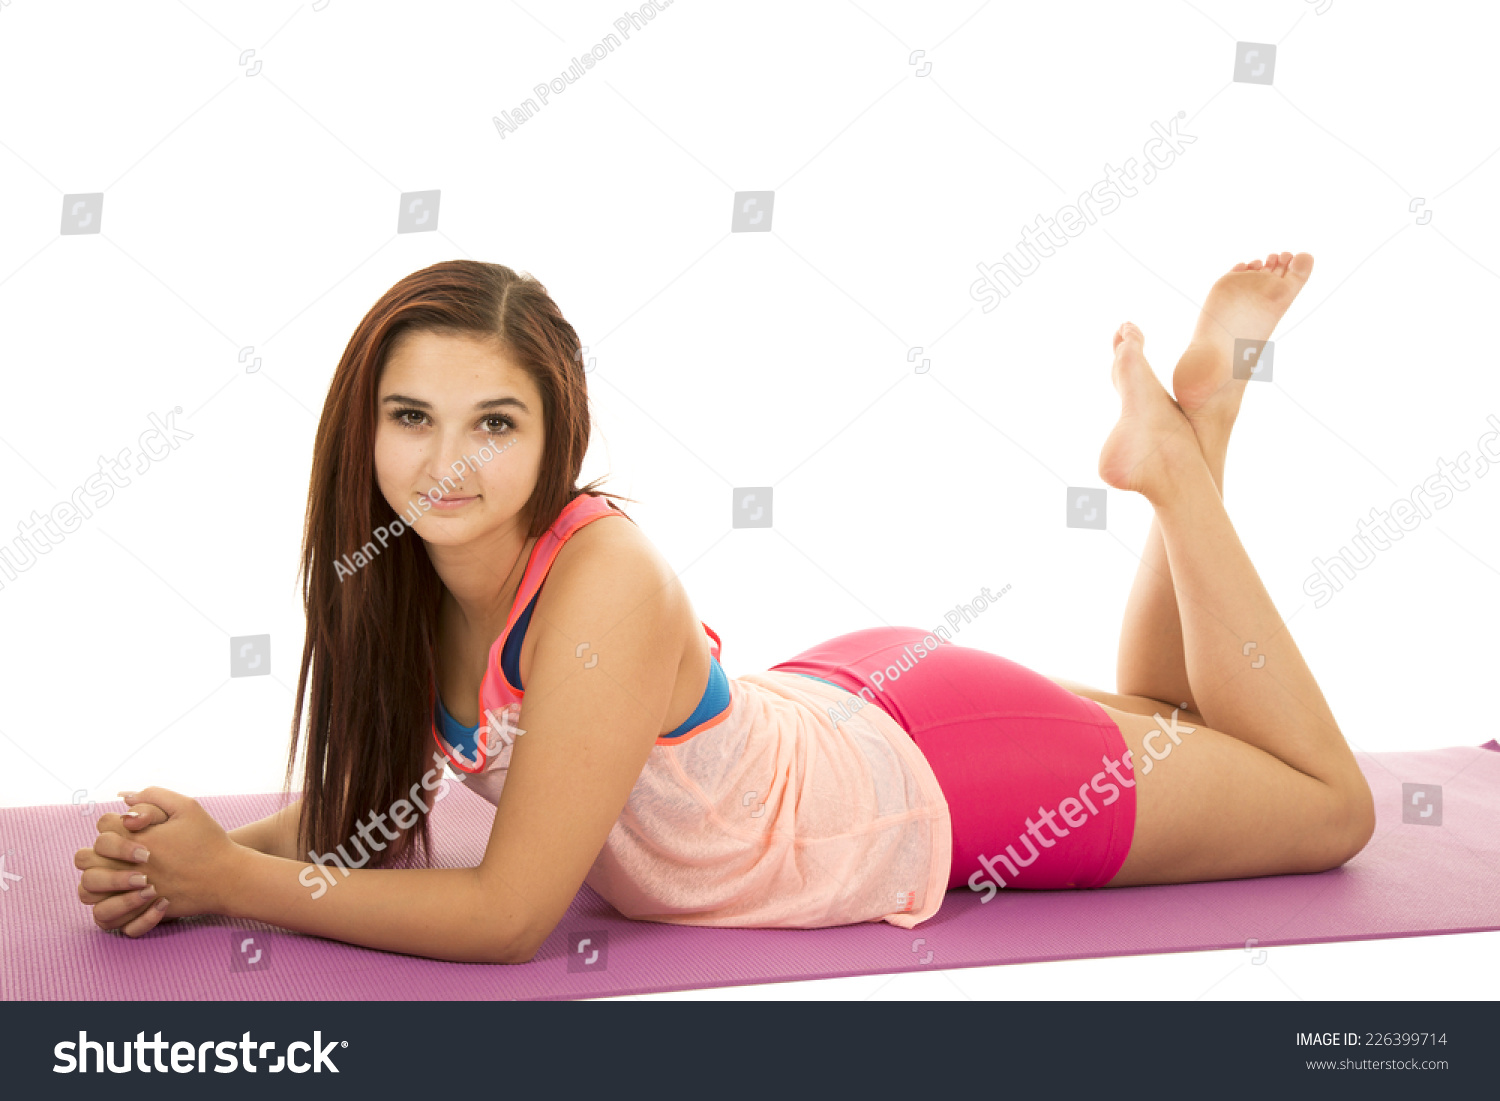 Woman Laying On Her Stomach Her Stockfoto Shutterstock